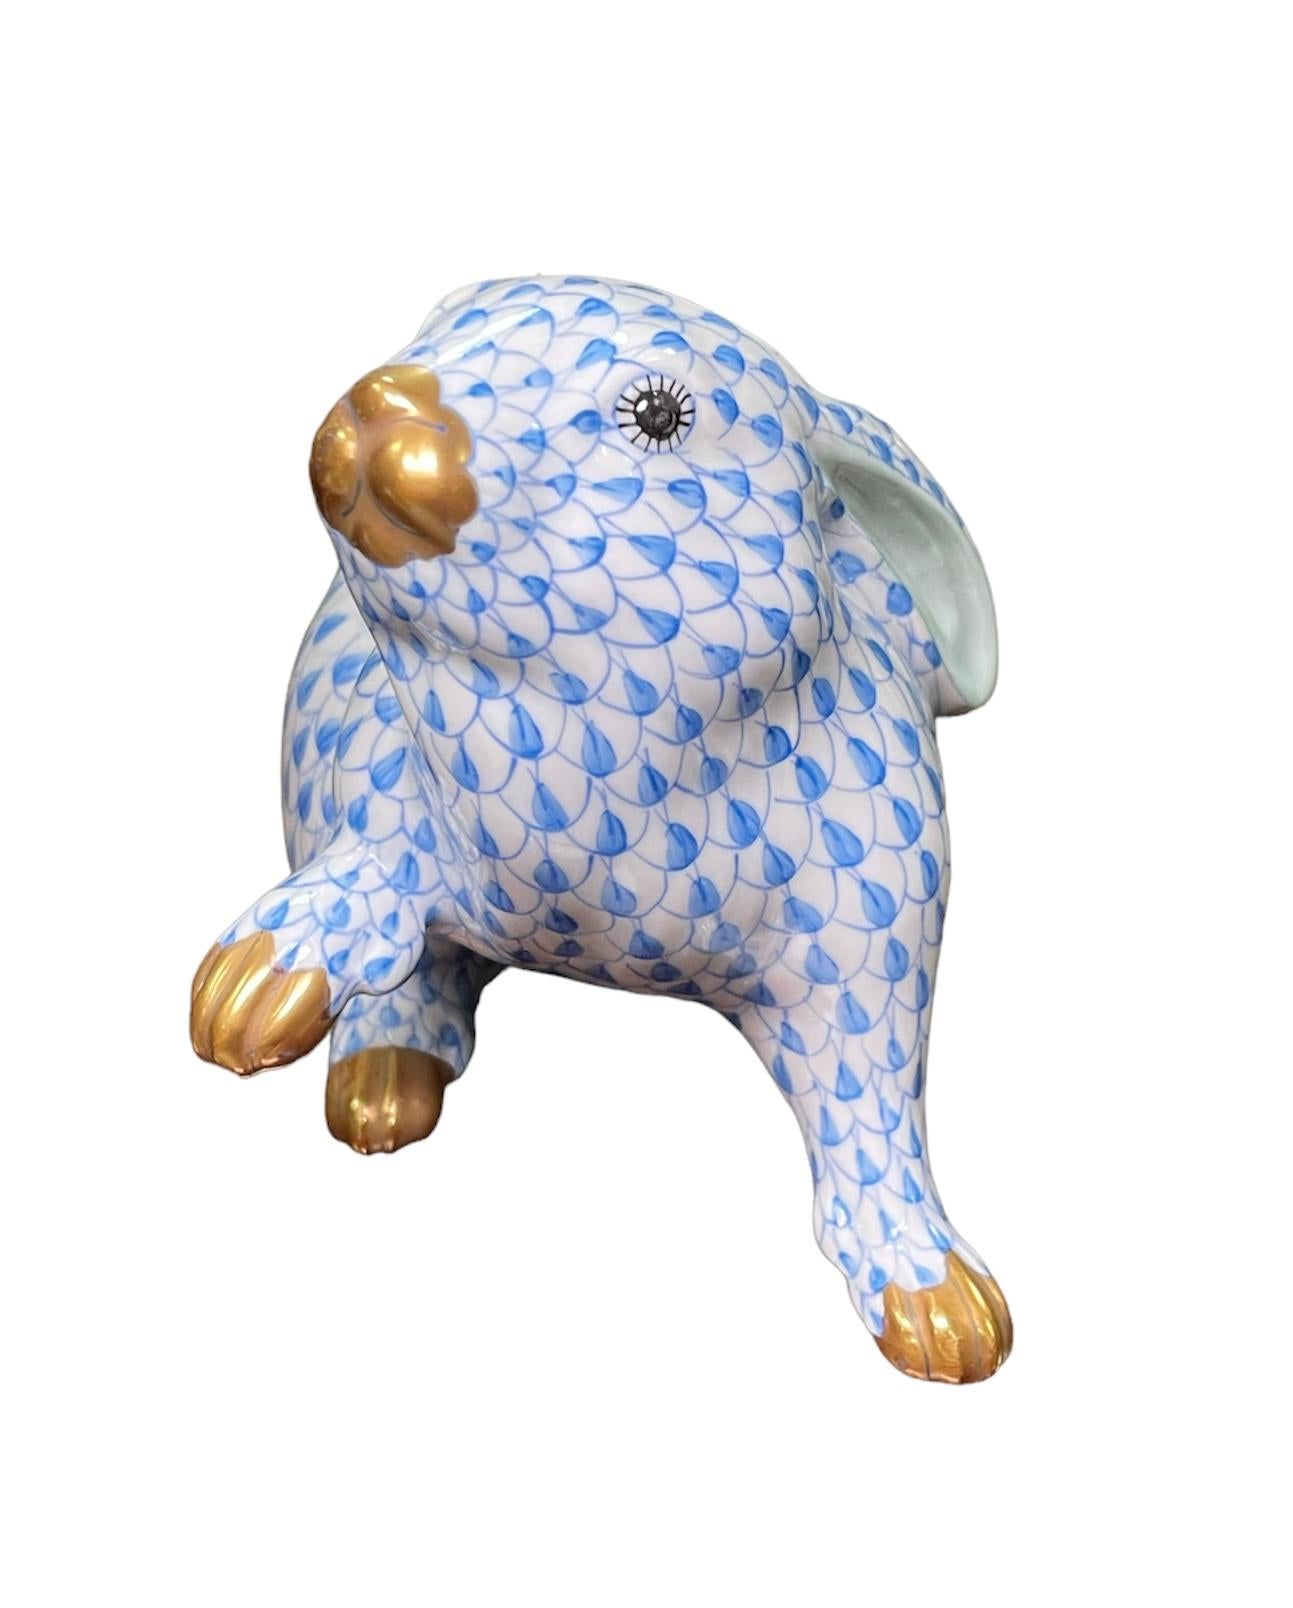 This is a Herend porcelain hand painted friendly and sweet rabbit that has one of its paw up ( like offering you it’s friendship). Its background is white with royal blue fish scale net pattern. The inside of the ears are light green color. The eyes